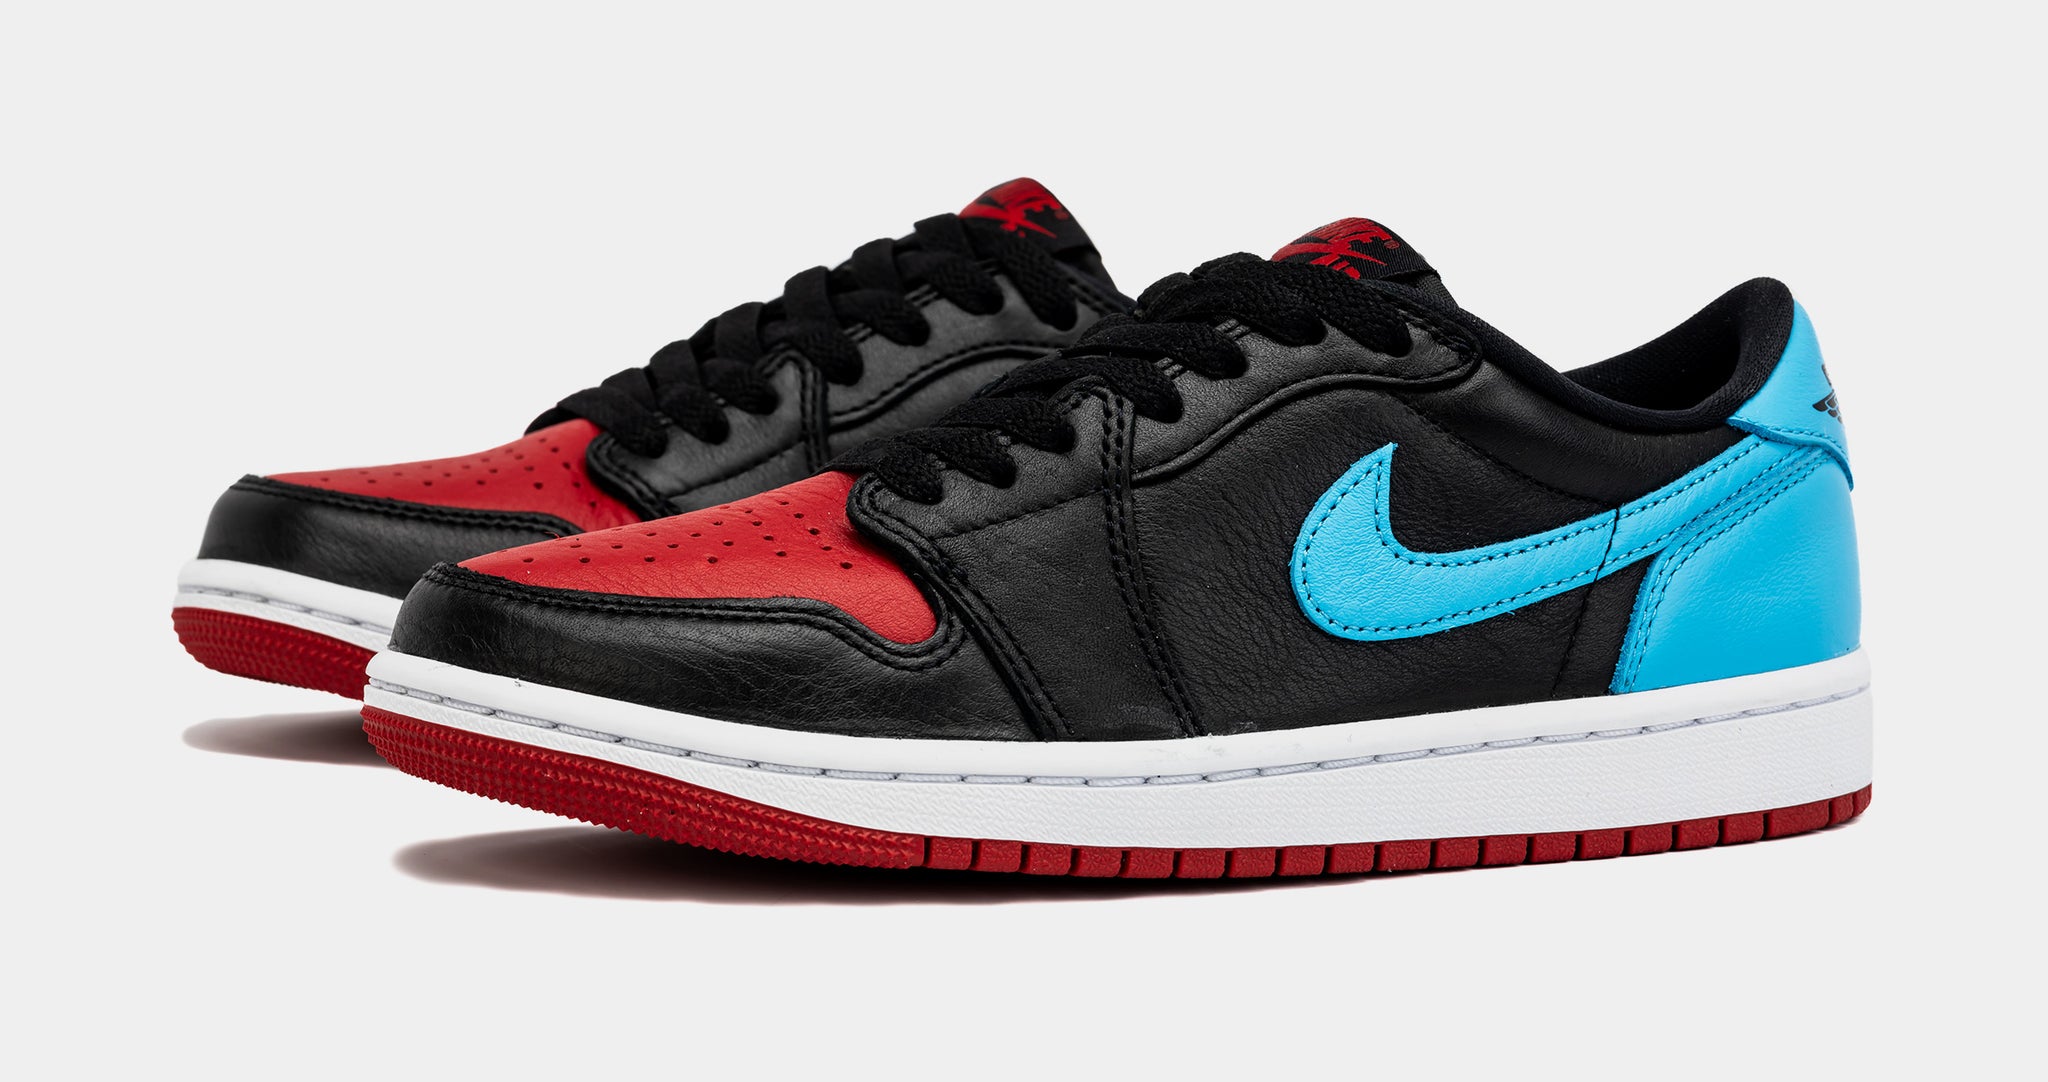 Air Jordan 1 Low OG UNC to Chicago Womens Lifestyle Shoes (Black/Red/Blue)